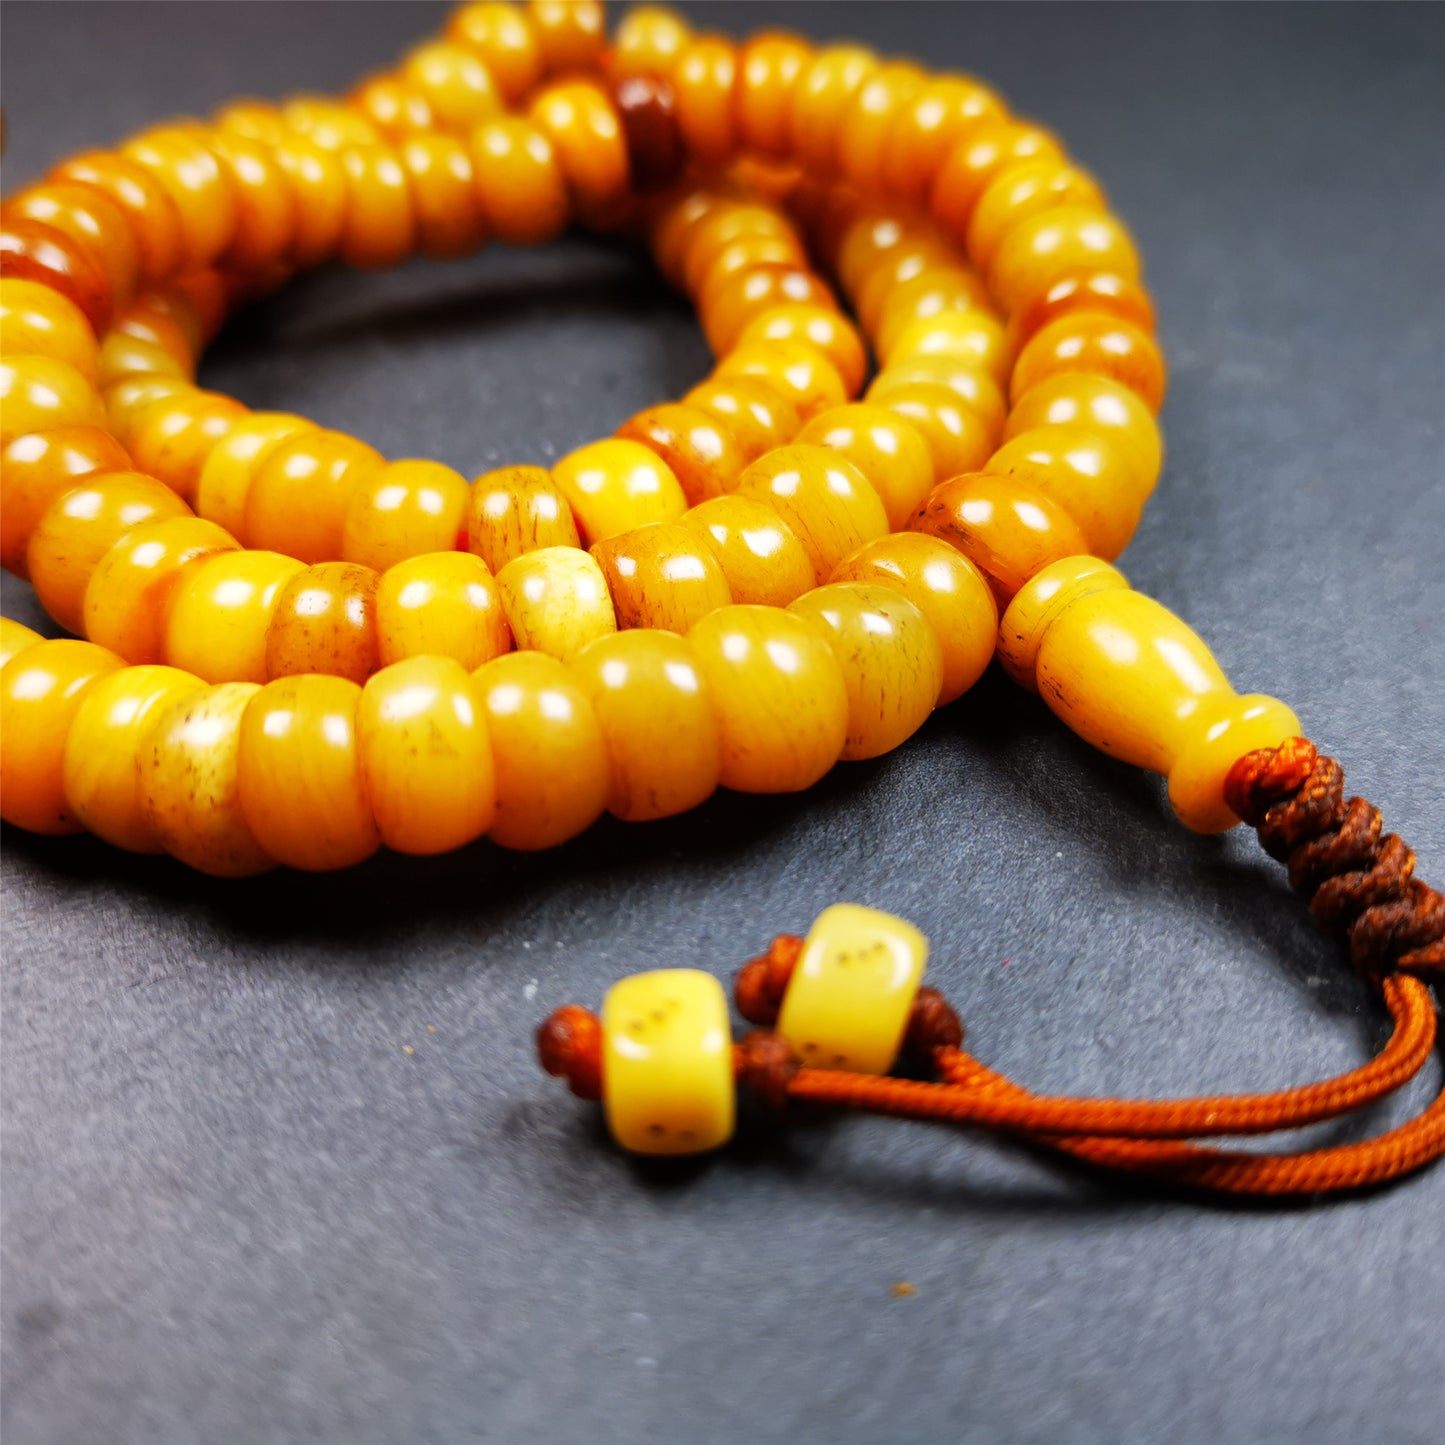 This mala was made by Tibetan craftsmen,about 20 years old. It is made of yak bone, yellow color,108 barrel cut beads diameter of 10mm / 0.4",circumference is 64cm / 25.2",1 guru bead and 2 dice pendant beads.